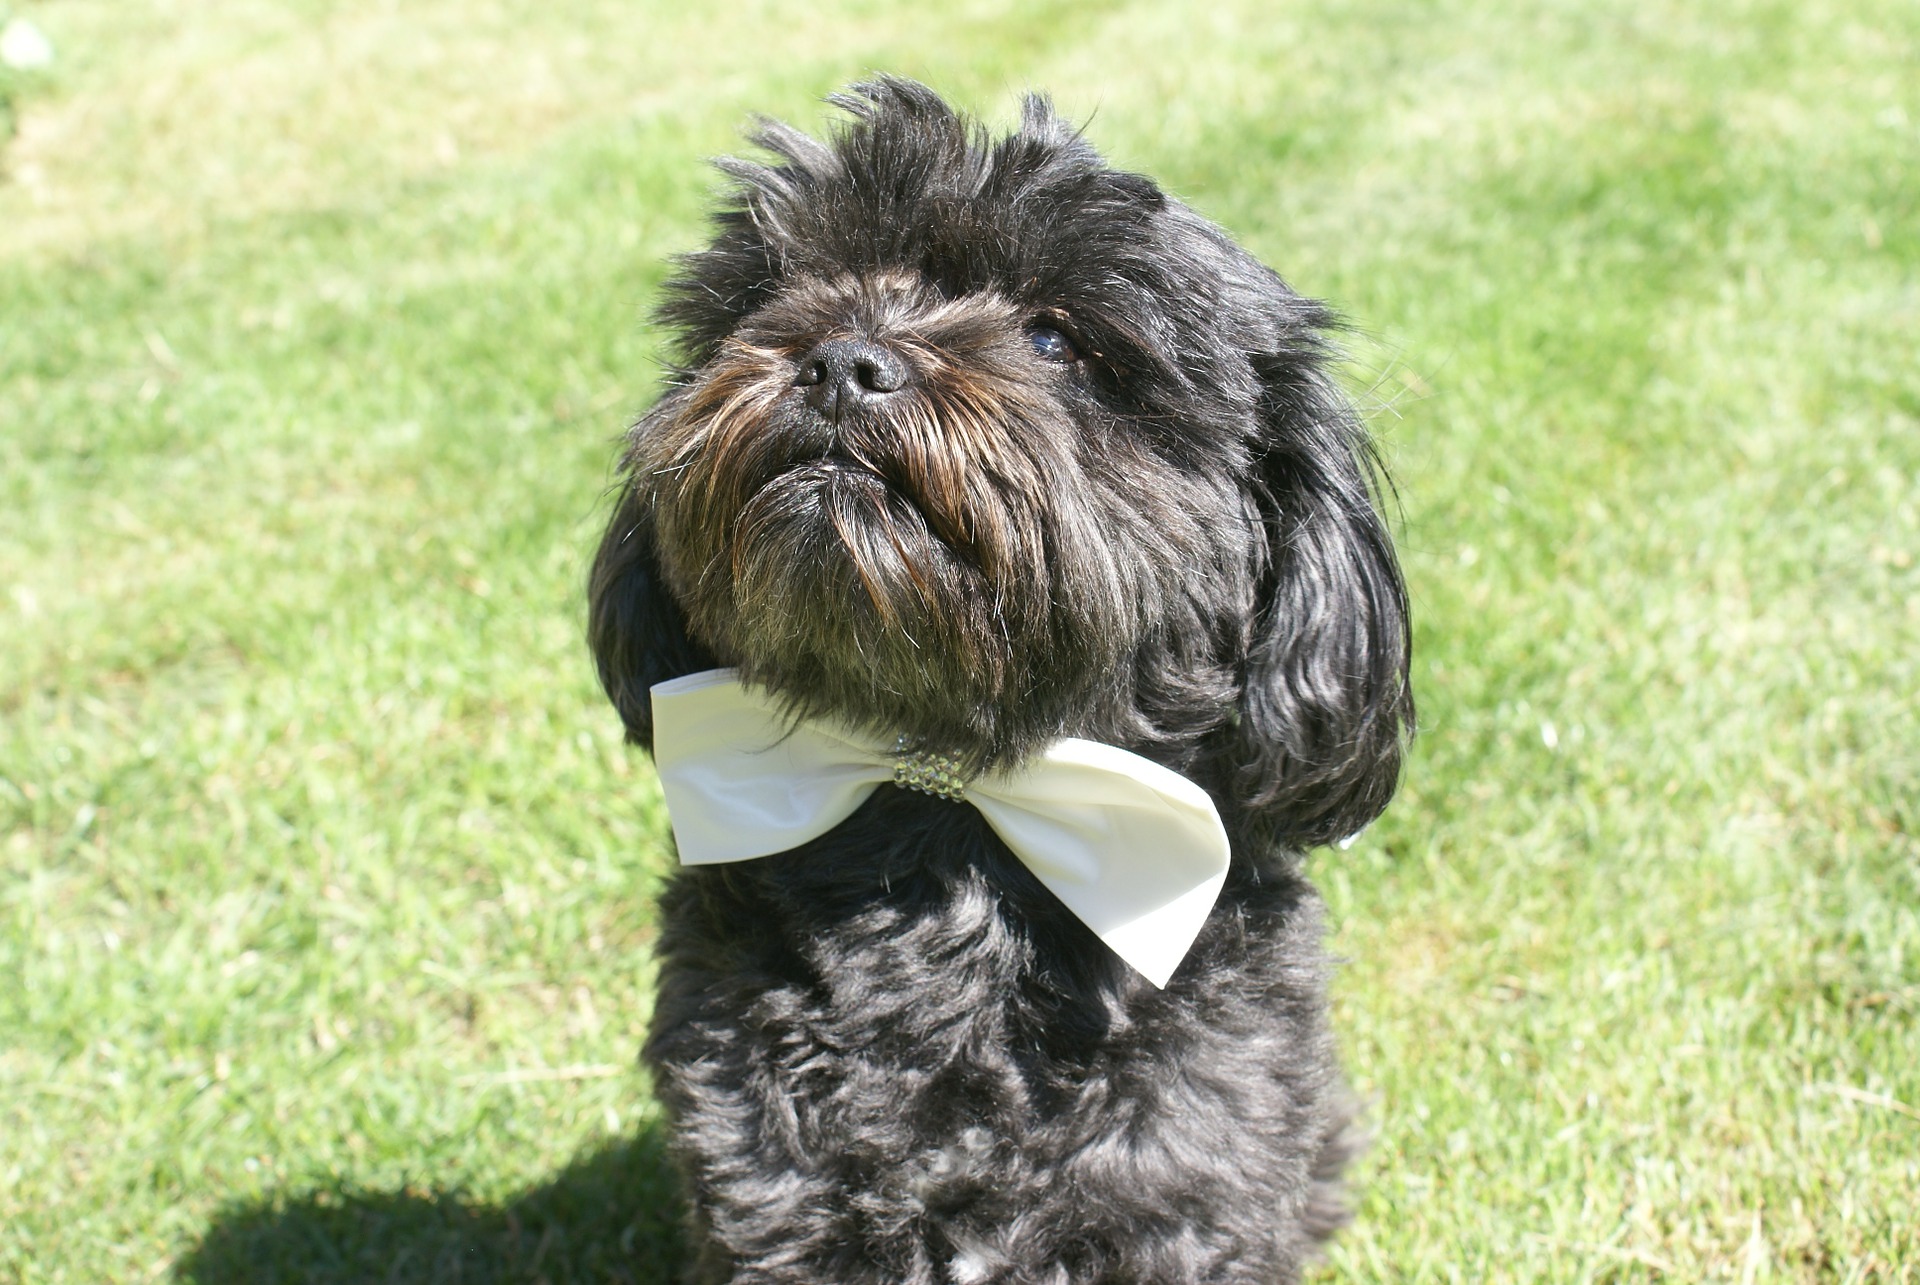 The Affenpinscher comes in a variety of colors, including black, gray, silver, black and tan, and red